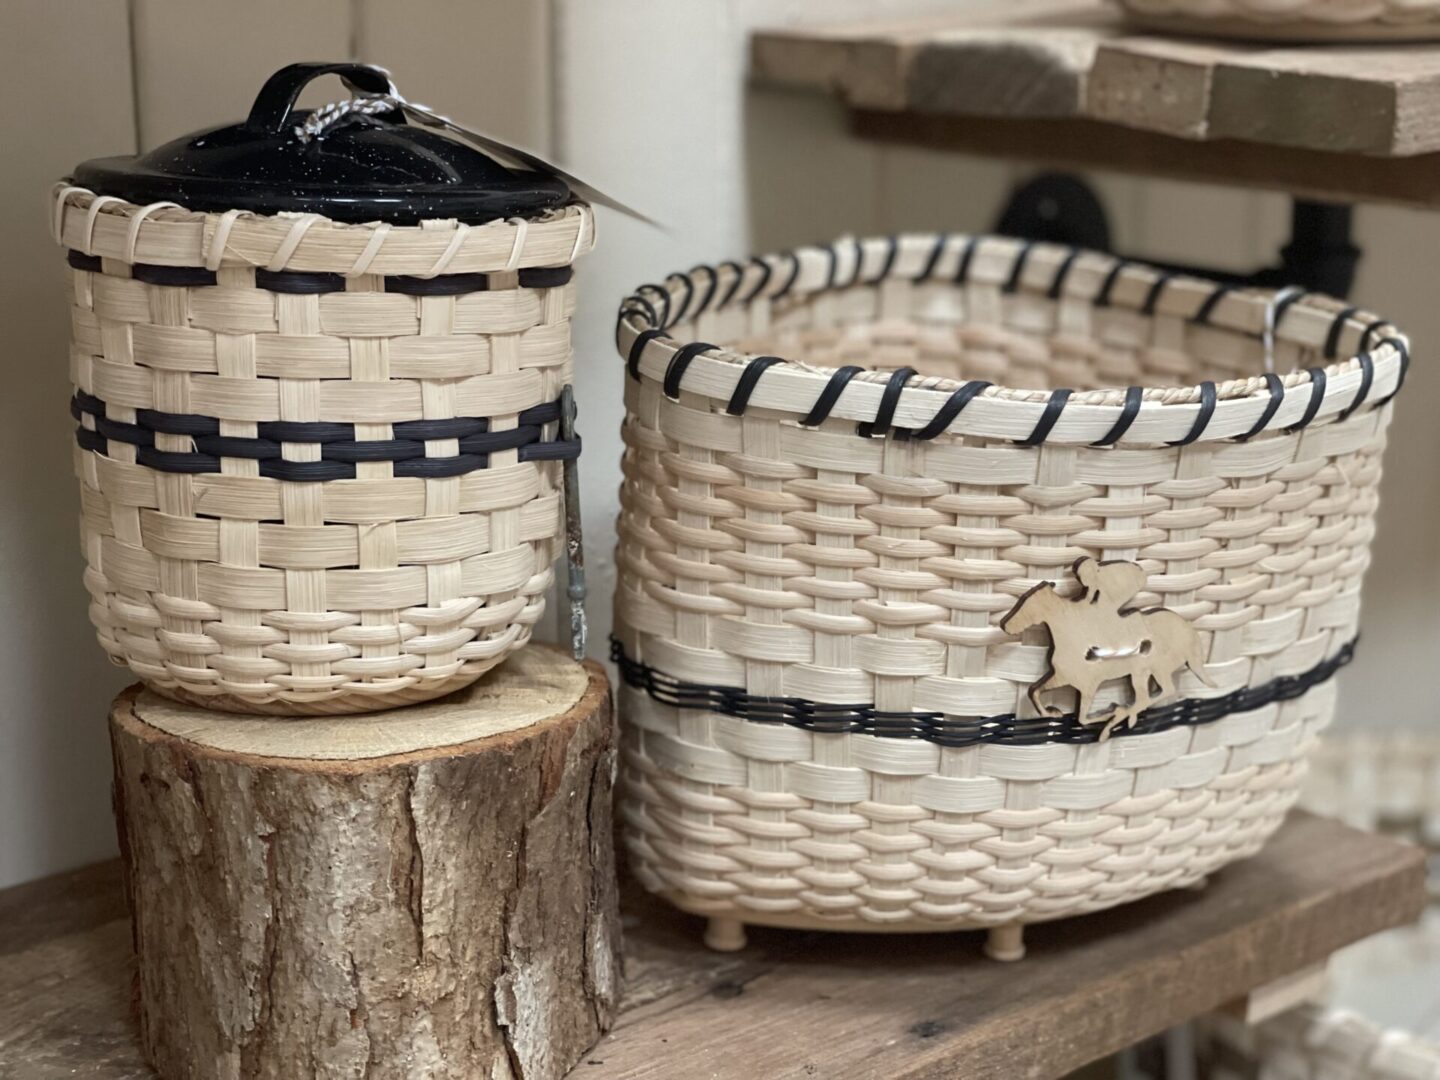 Two baskets sitting on top of a wooden shelf.